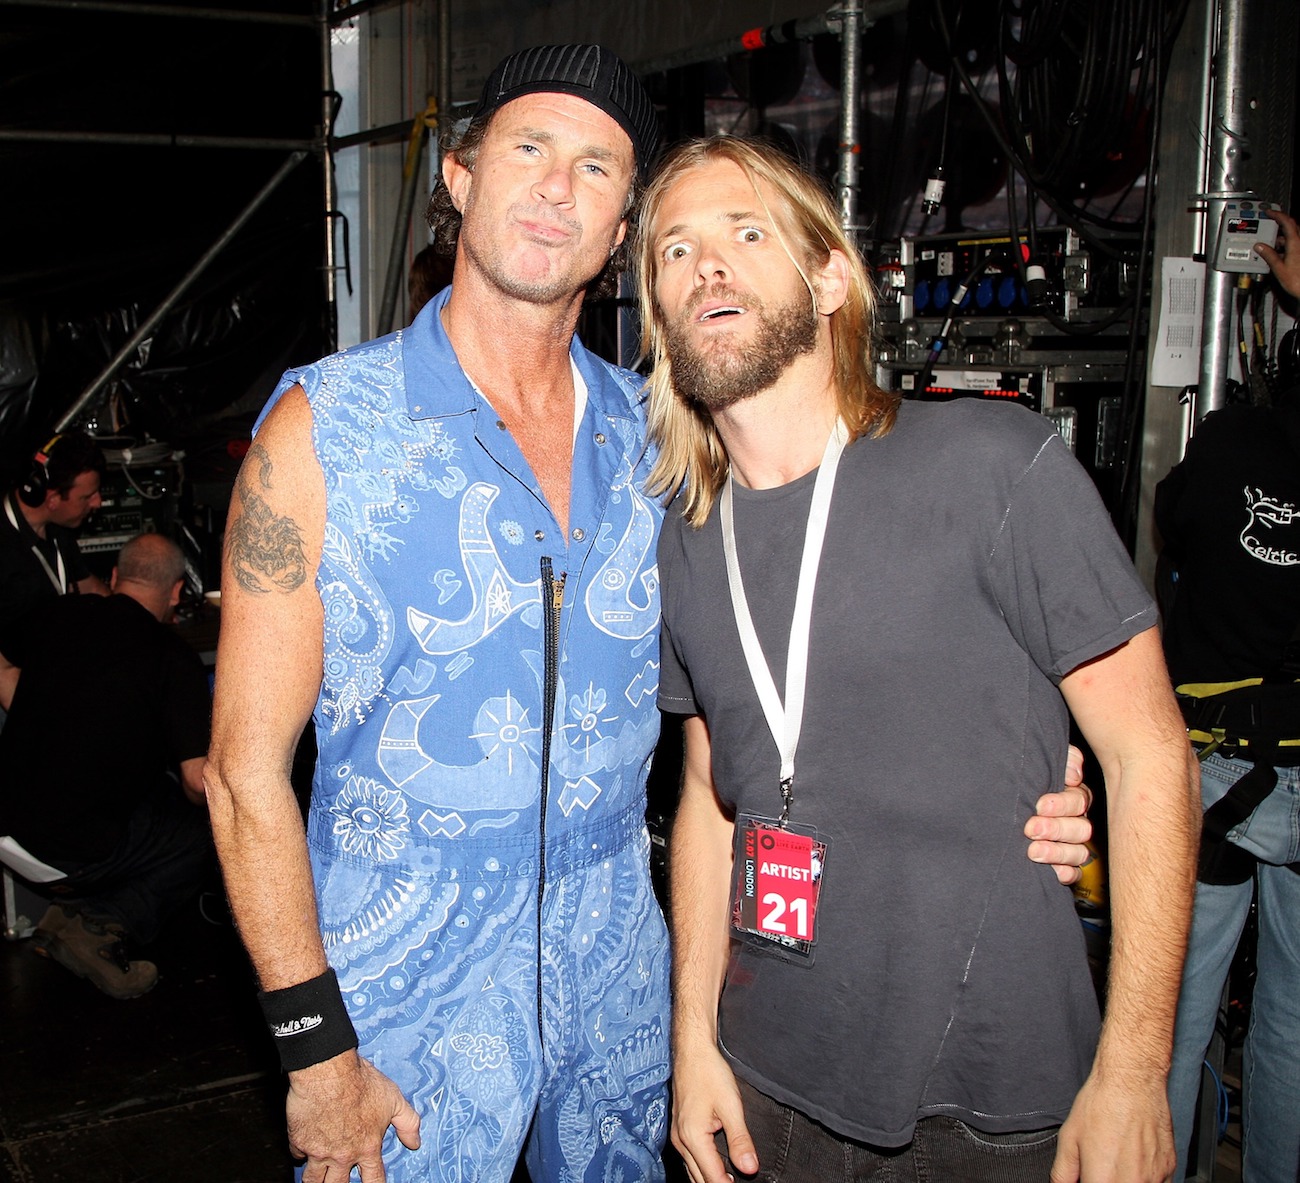 Red Hot Chili Peppers' Chad Smith and Foo Fighters' Taylor Hawkins backstage at Live Earth in 2007.